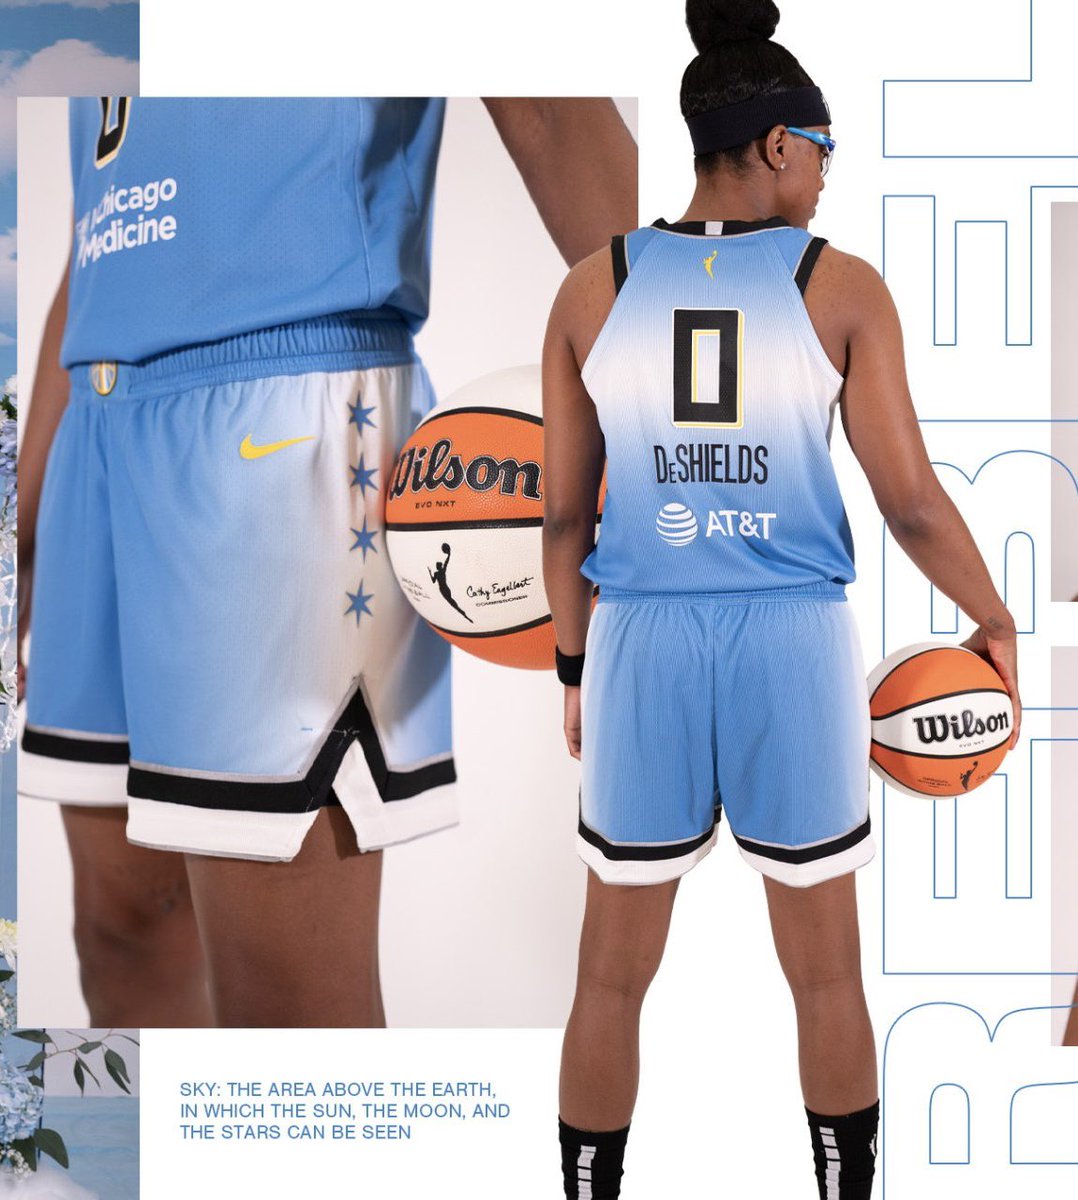 Seeing more detailing of the shorts and the Chicago stars… UGH amazing perfect 10/10 no notes

Shorts are always so great #WNBAShorts 

Maybe I just like shorts #WNBAWeNeedMerch #Skytown